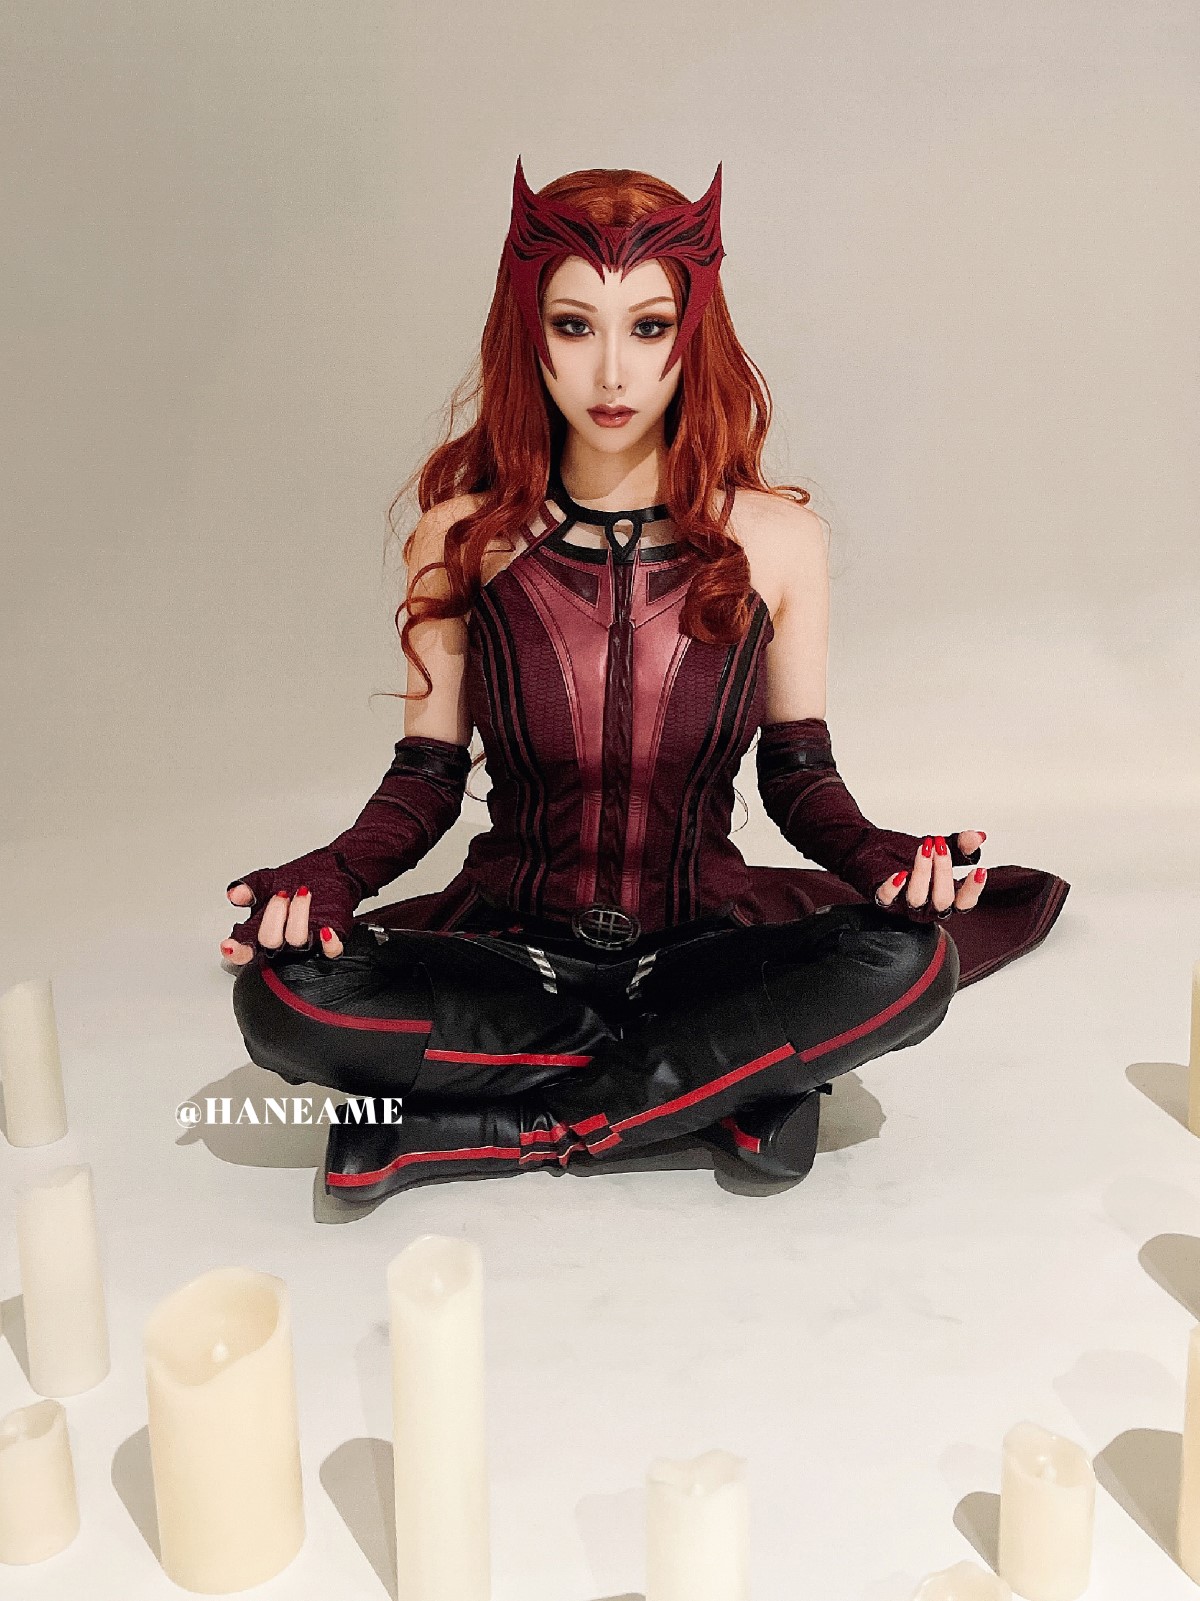 Coser@HaneAme Scarlet Witch 0029 0126243552.jpg